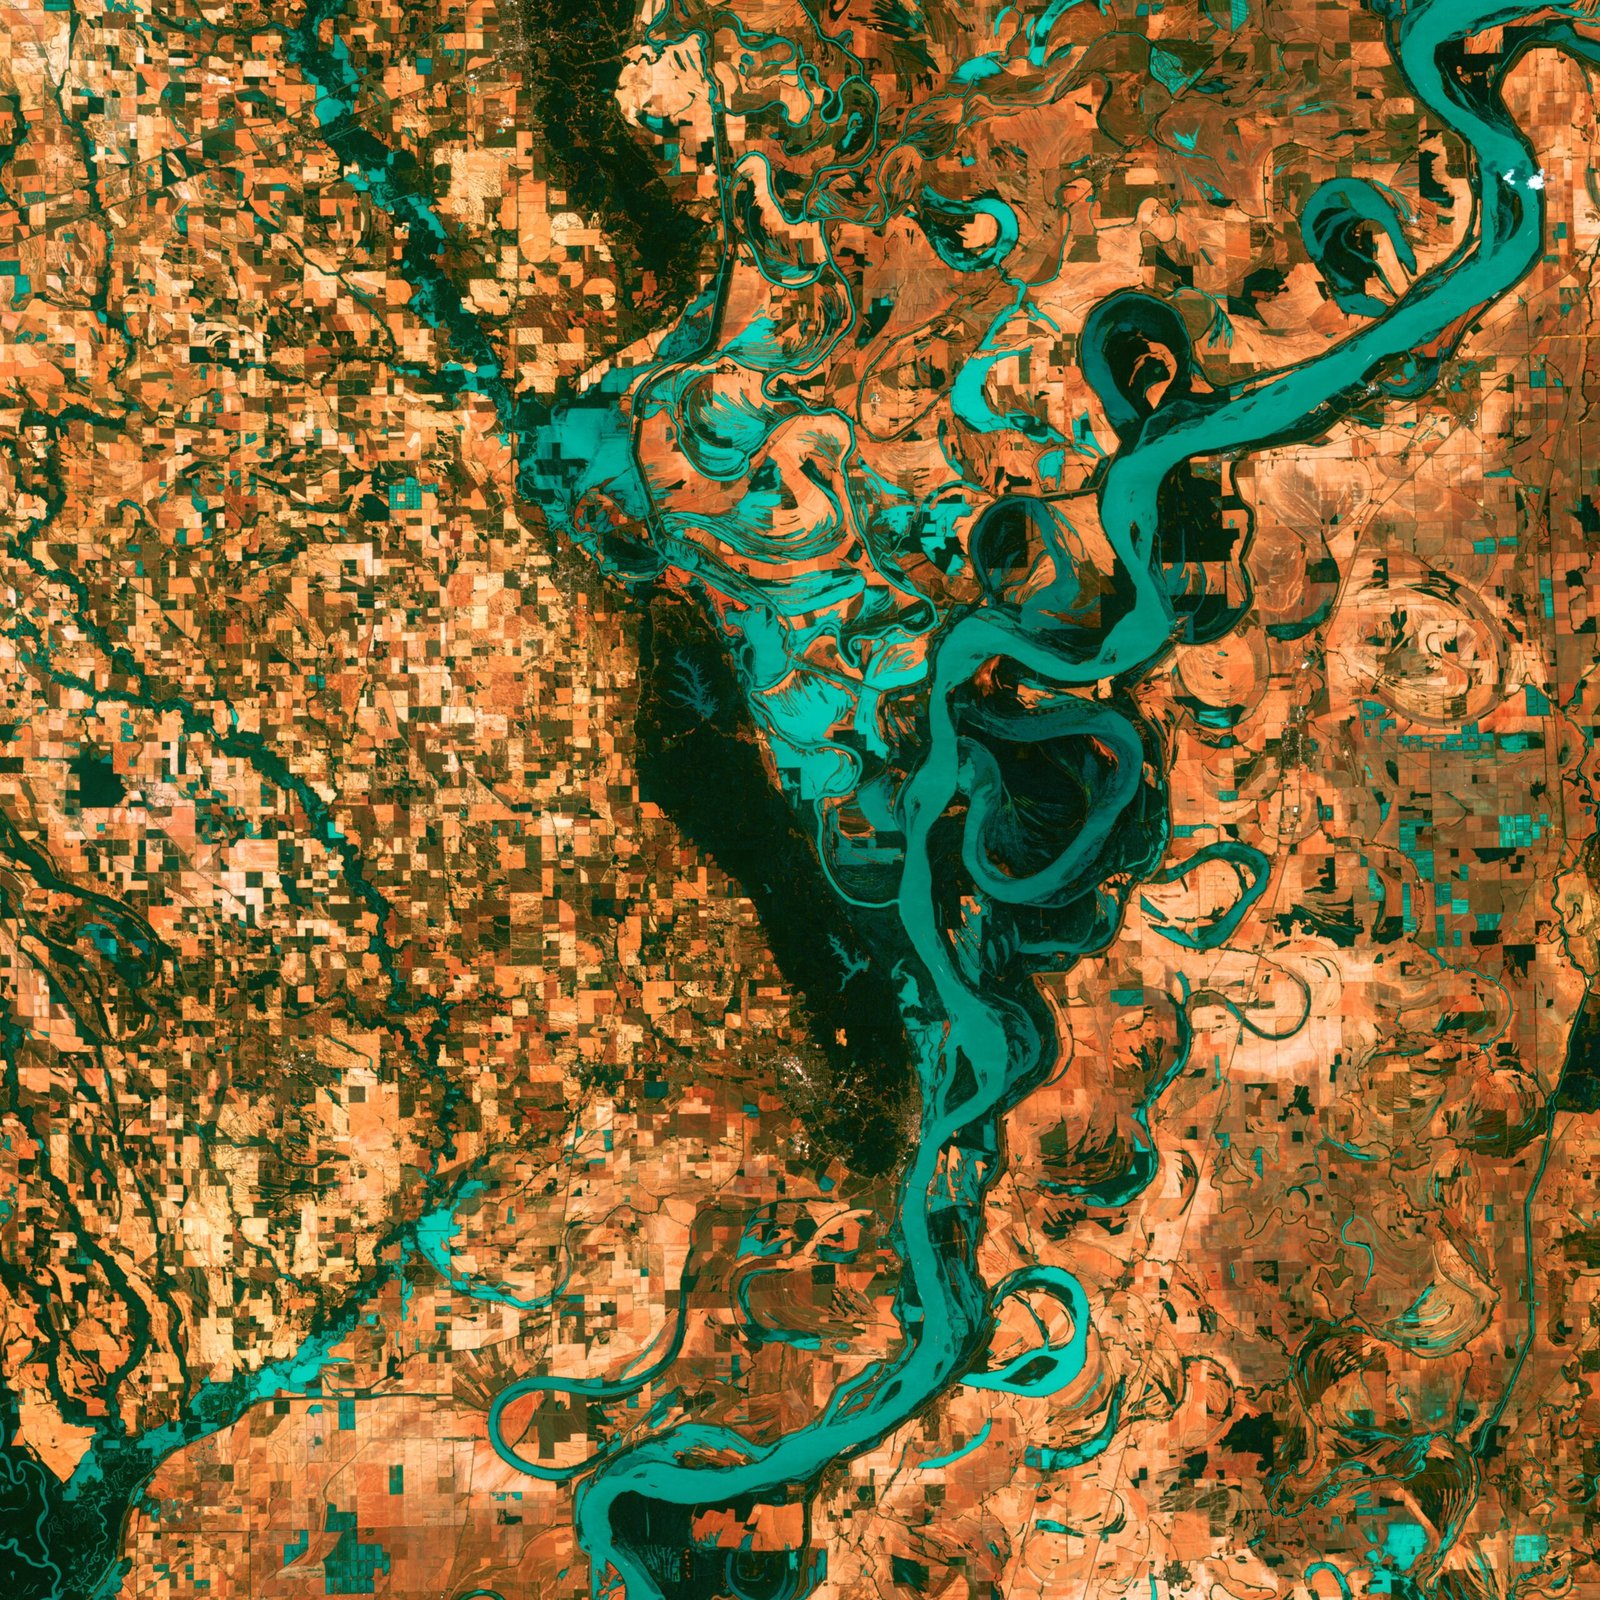 How to Interpret Satellite Imagery for Monitoring Changes in Earth’s Land Cover?